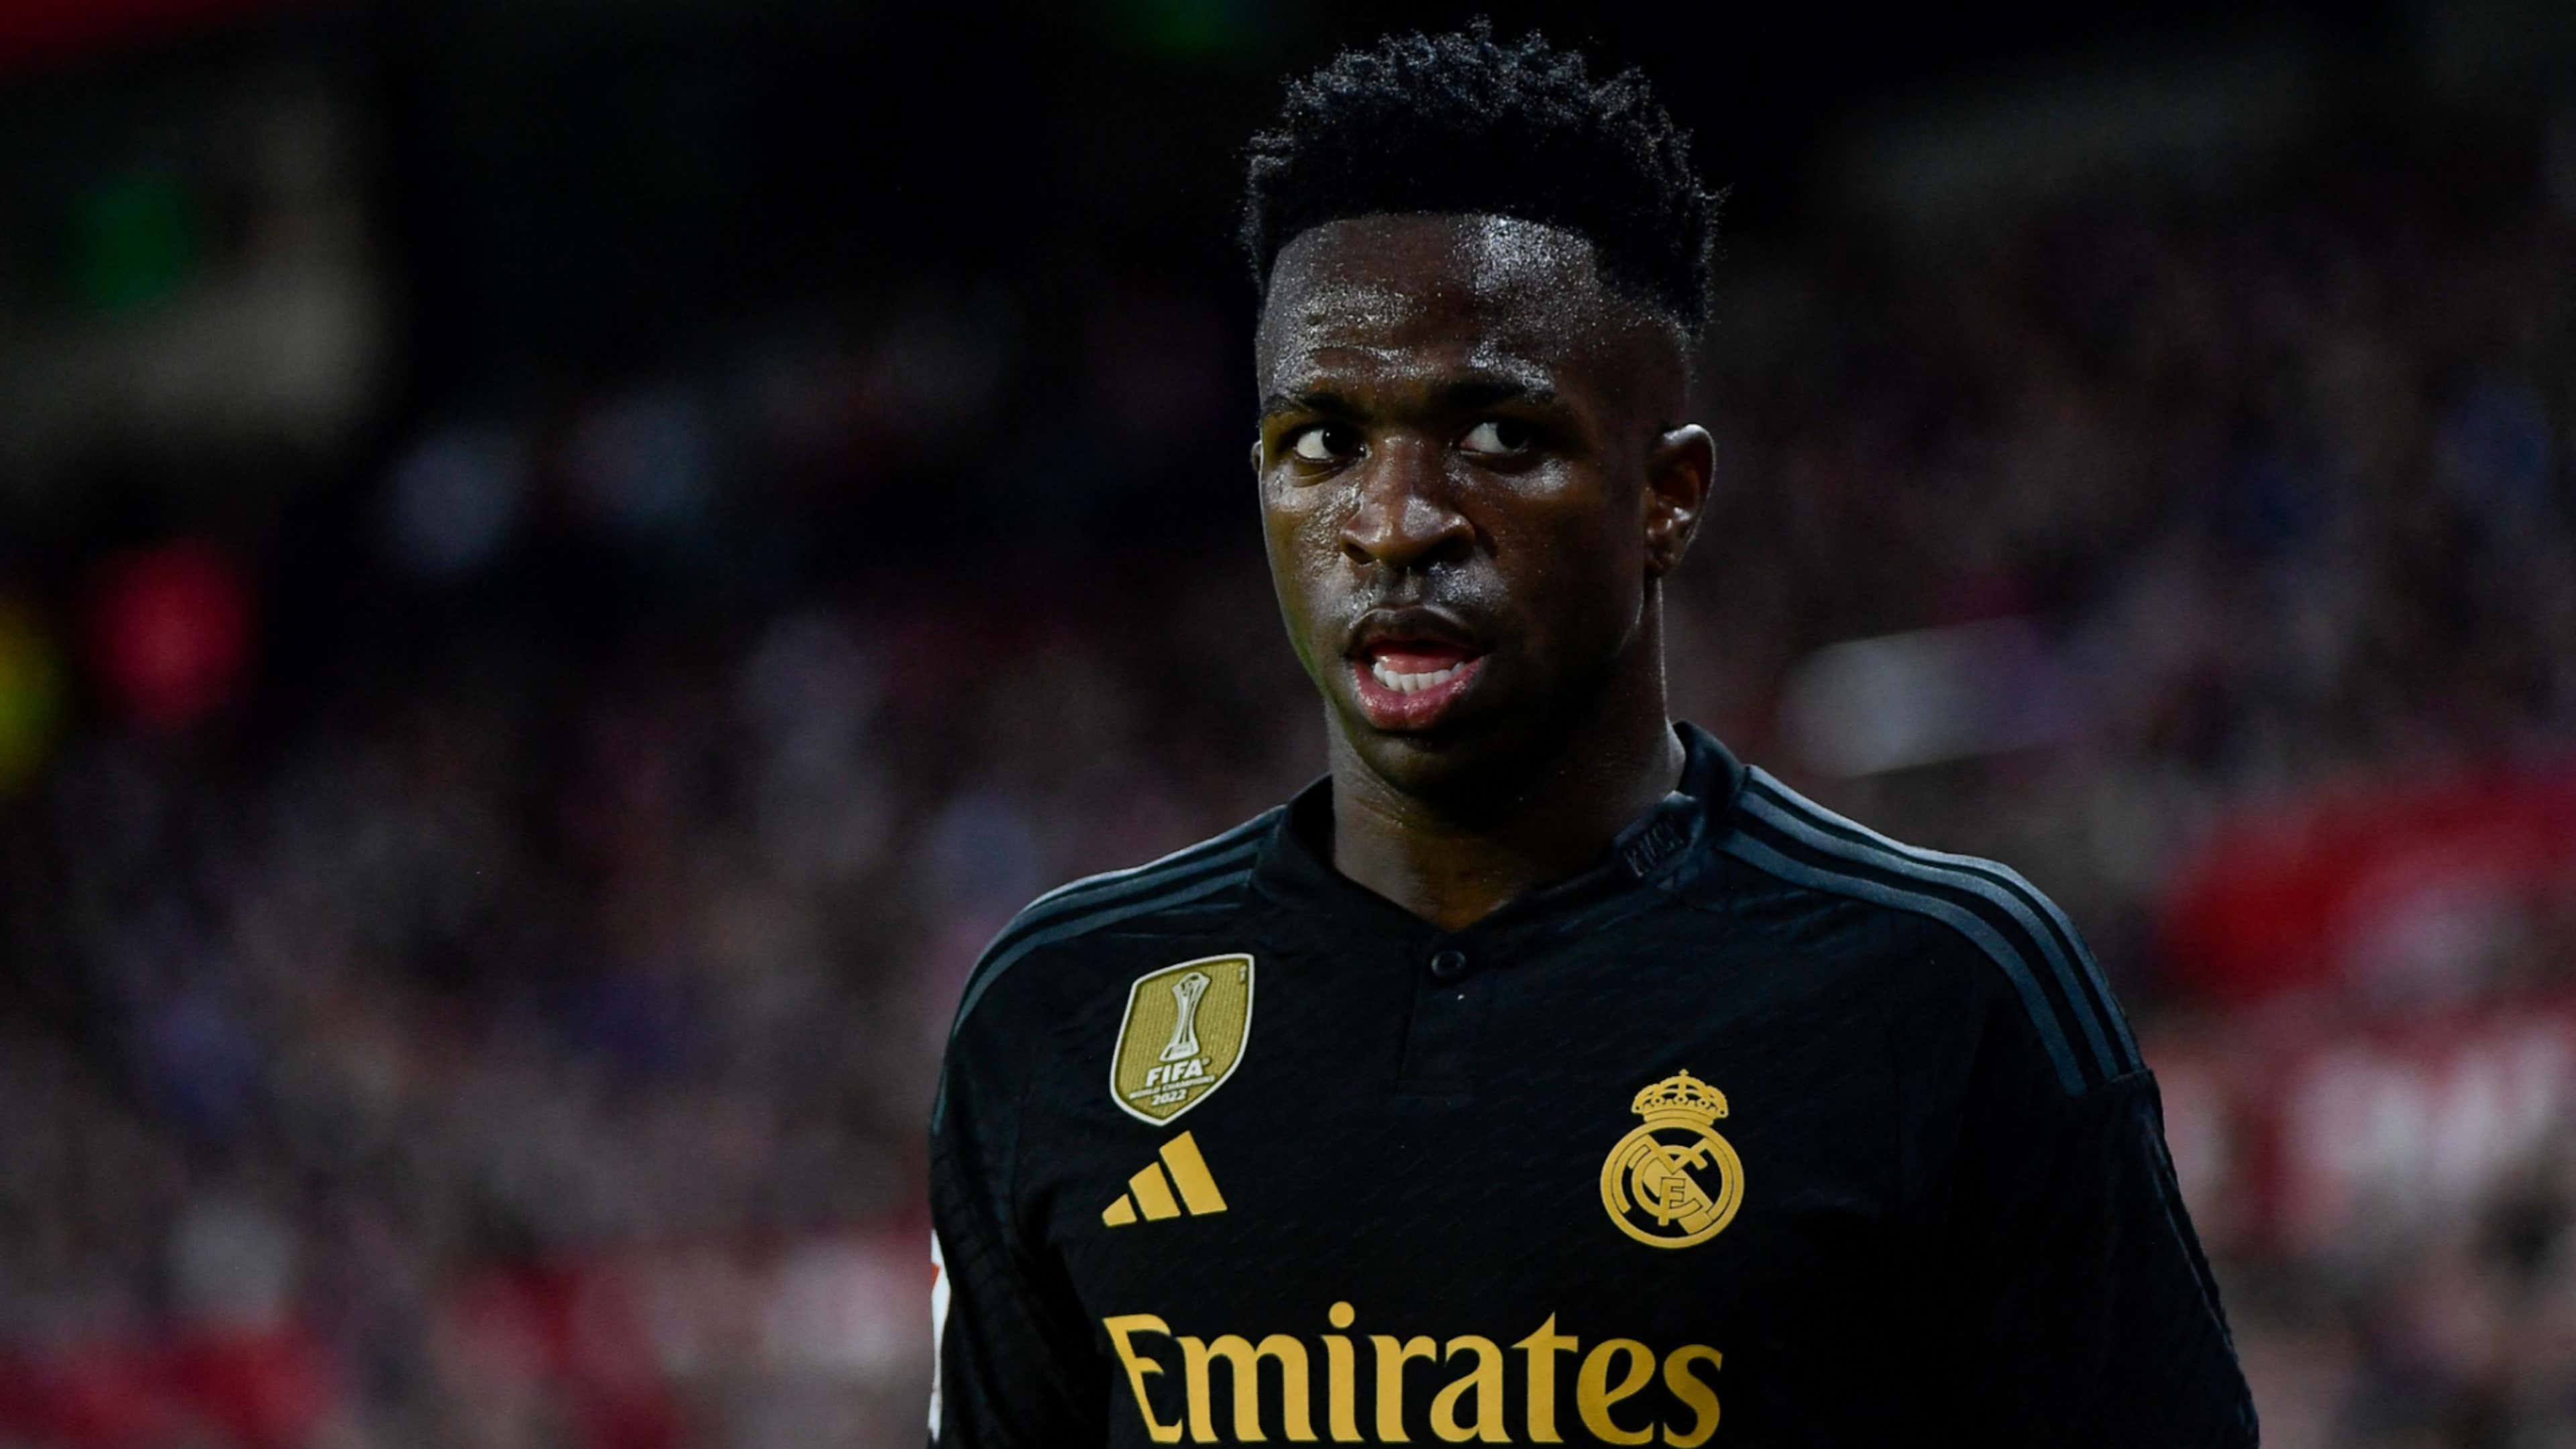 Spain: Real Madrid star Vinicius Jr. out with leg injury – Middle